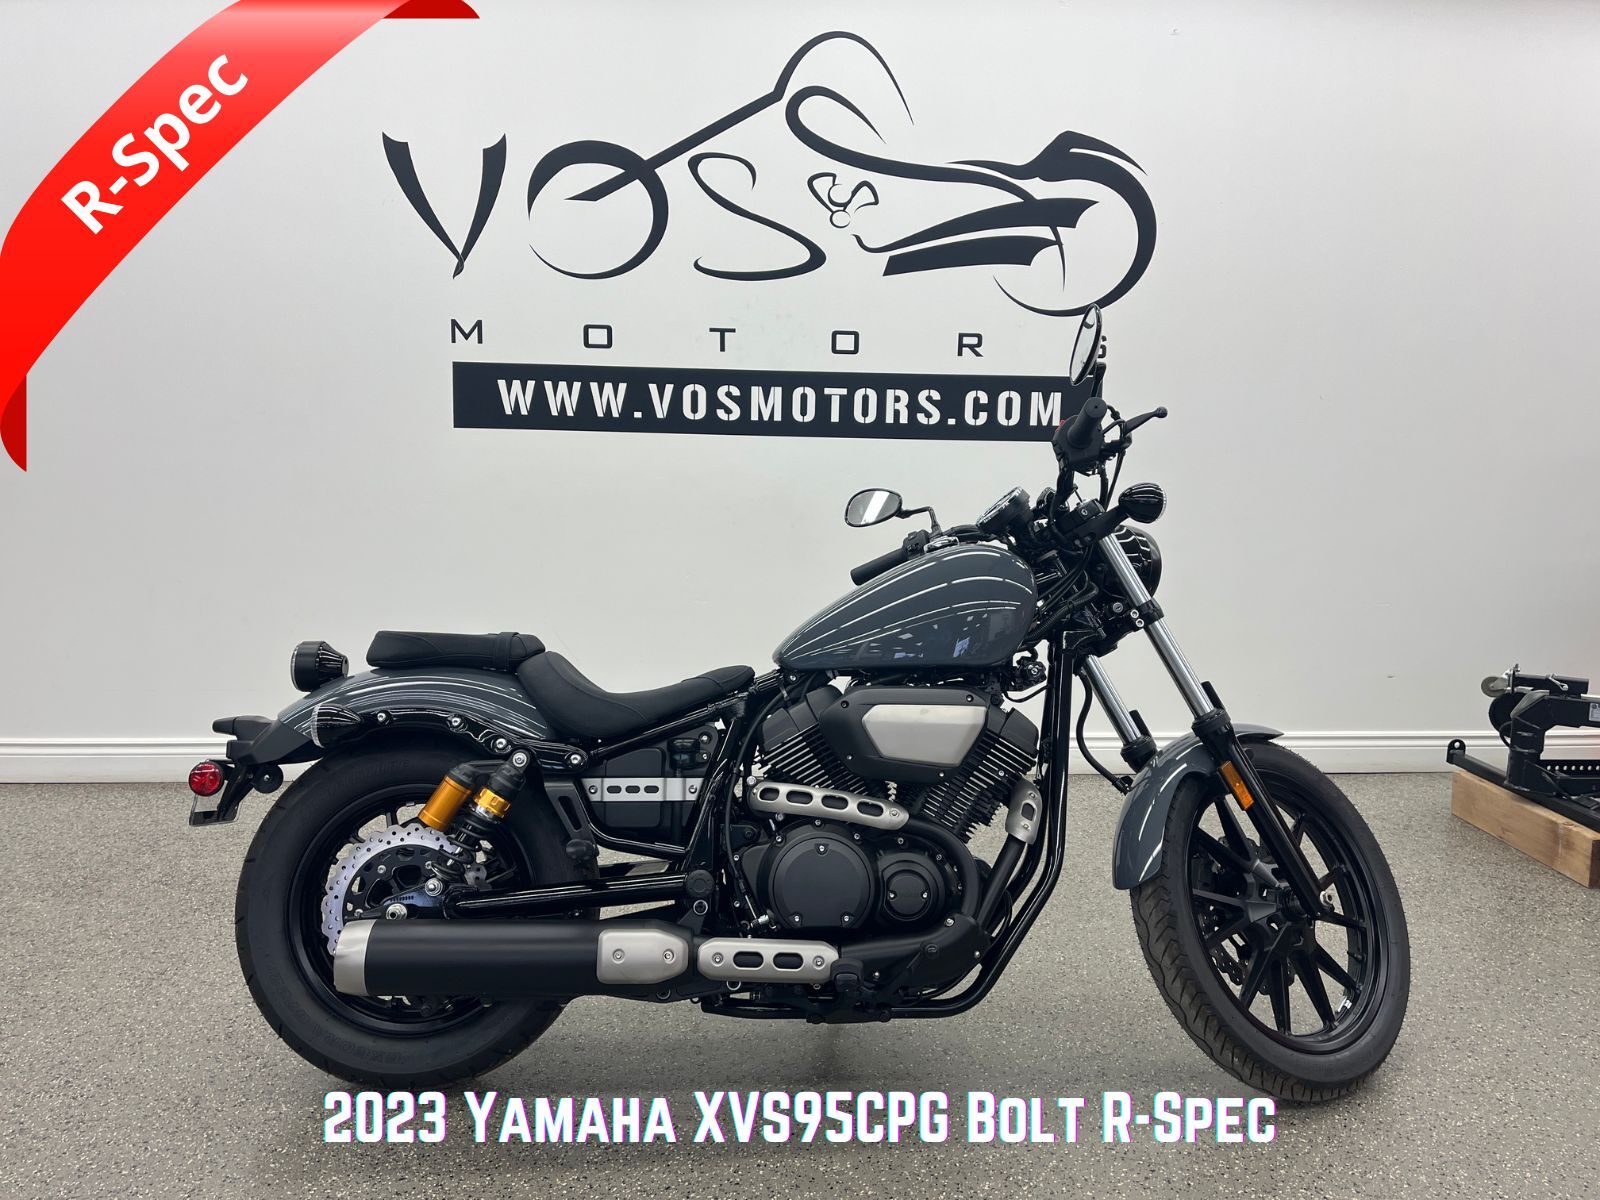 2023 Yamaha XVS95CPG Bolt R-Spec - V5836NP - -No Payments for 1 Year**